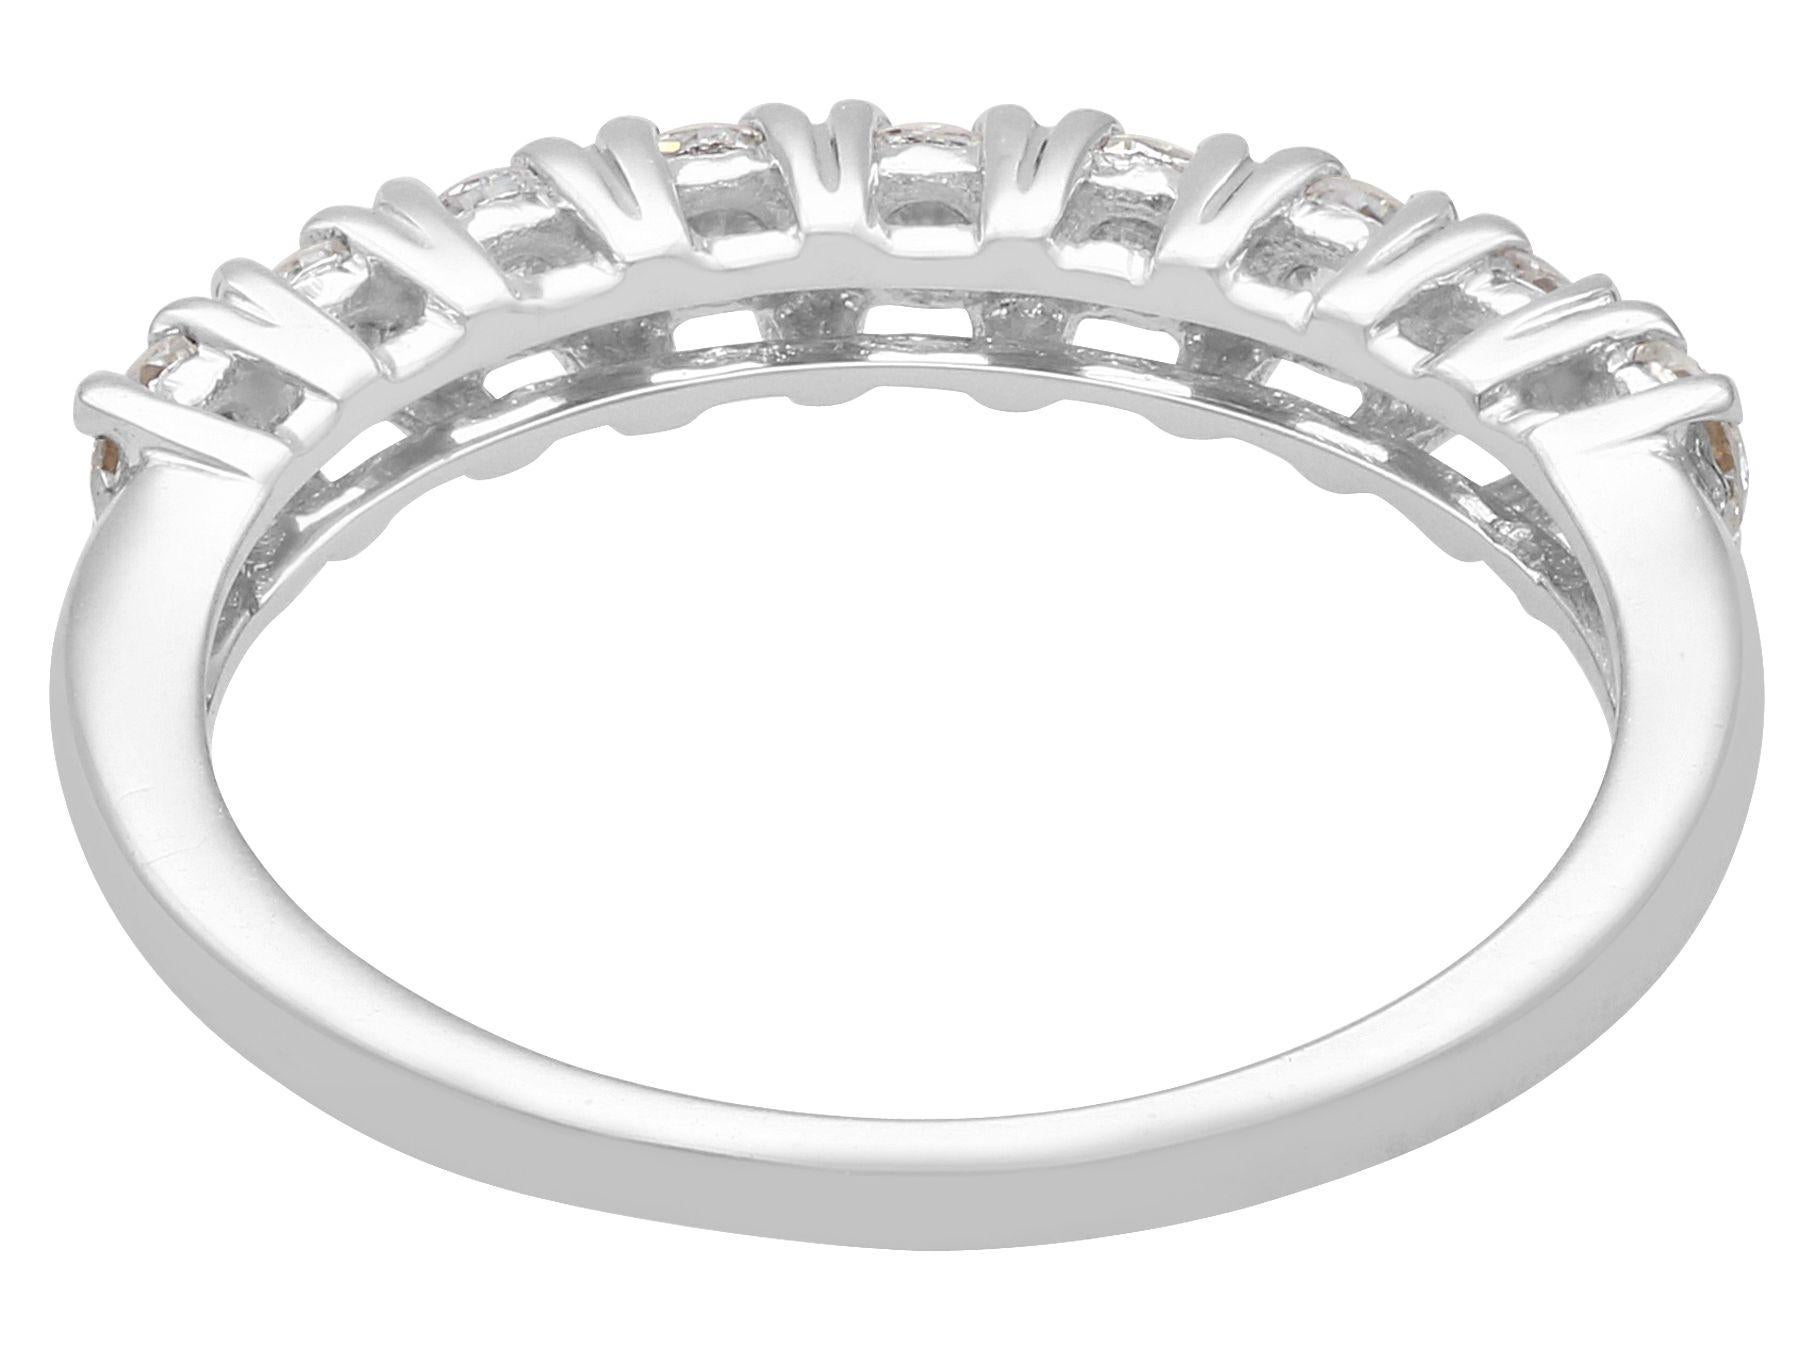 1970s 0.36 Carat Diamond 18k White Gold Half Eternity Ring In Excellent Condition For Sale In Jesmond, Newcastle Upon Tyne